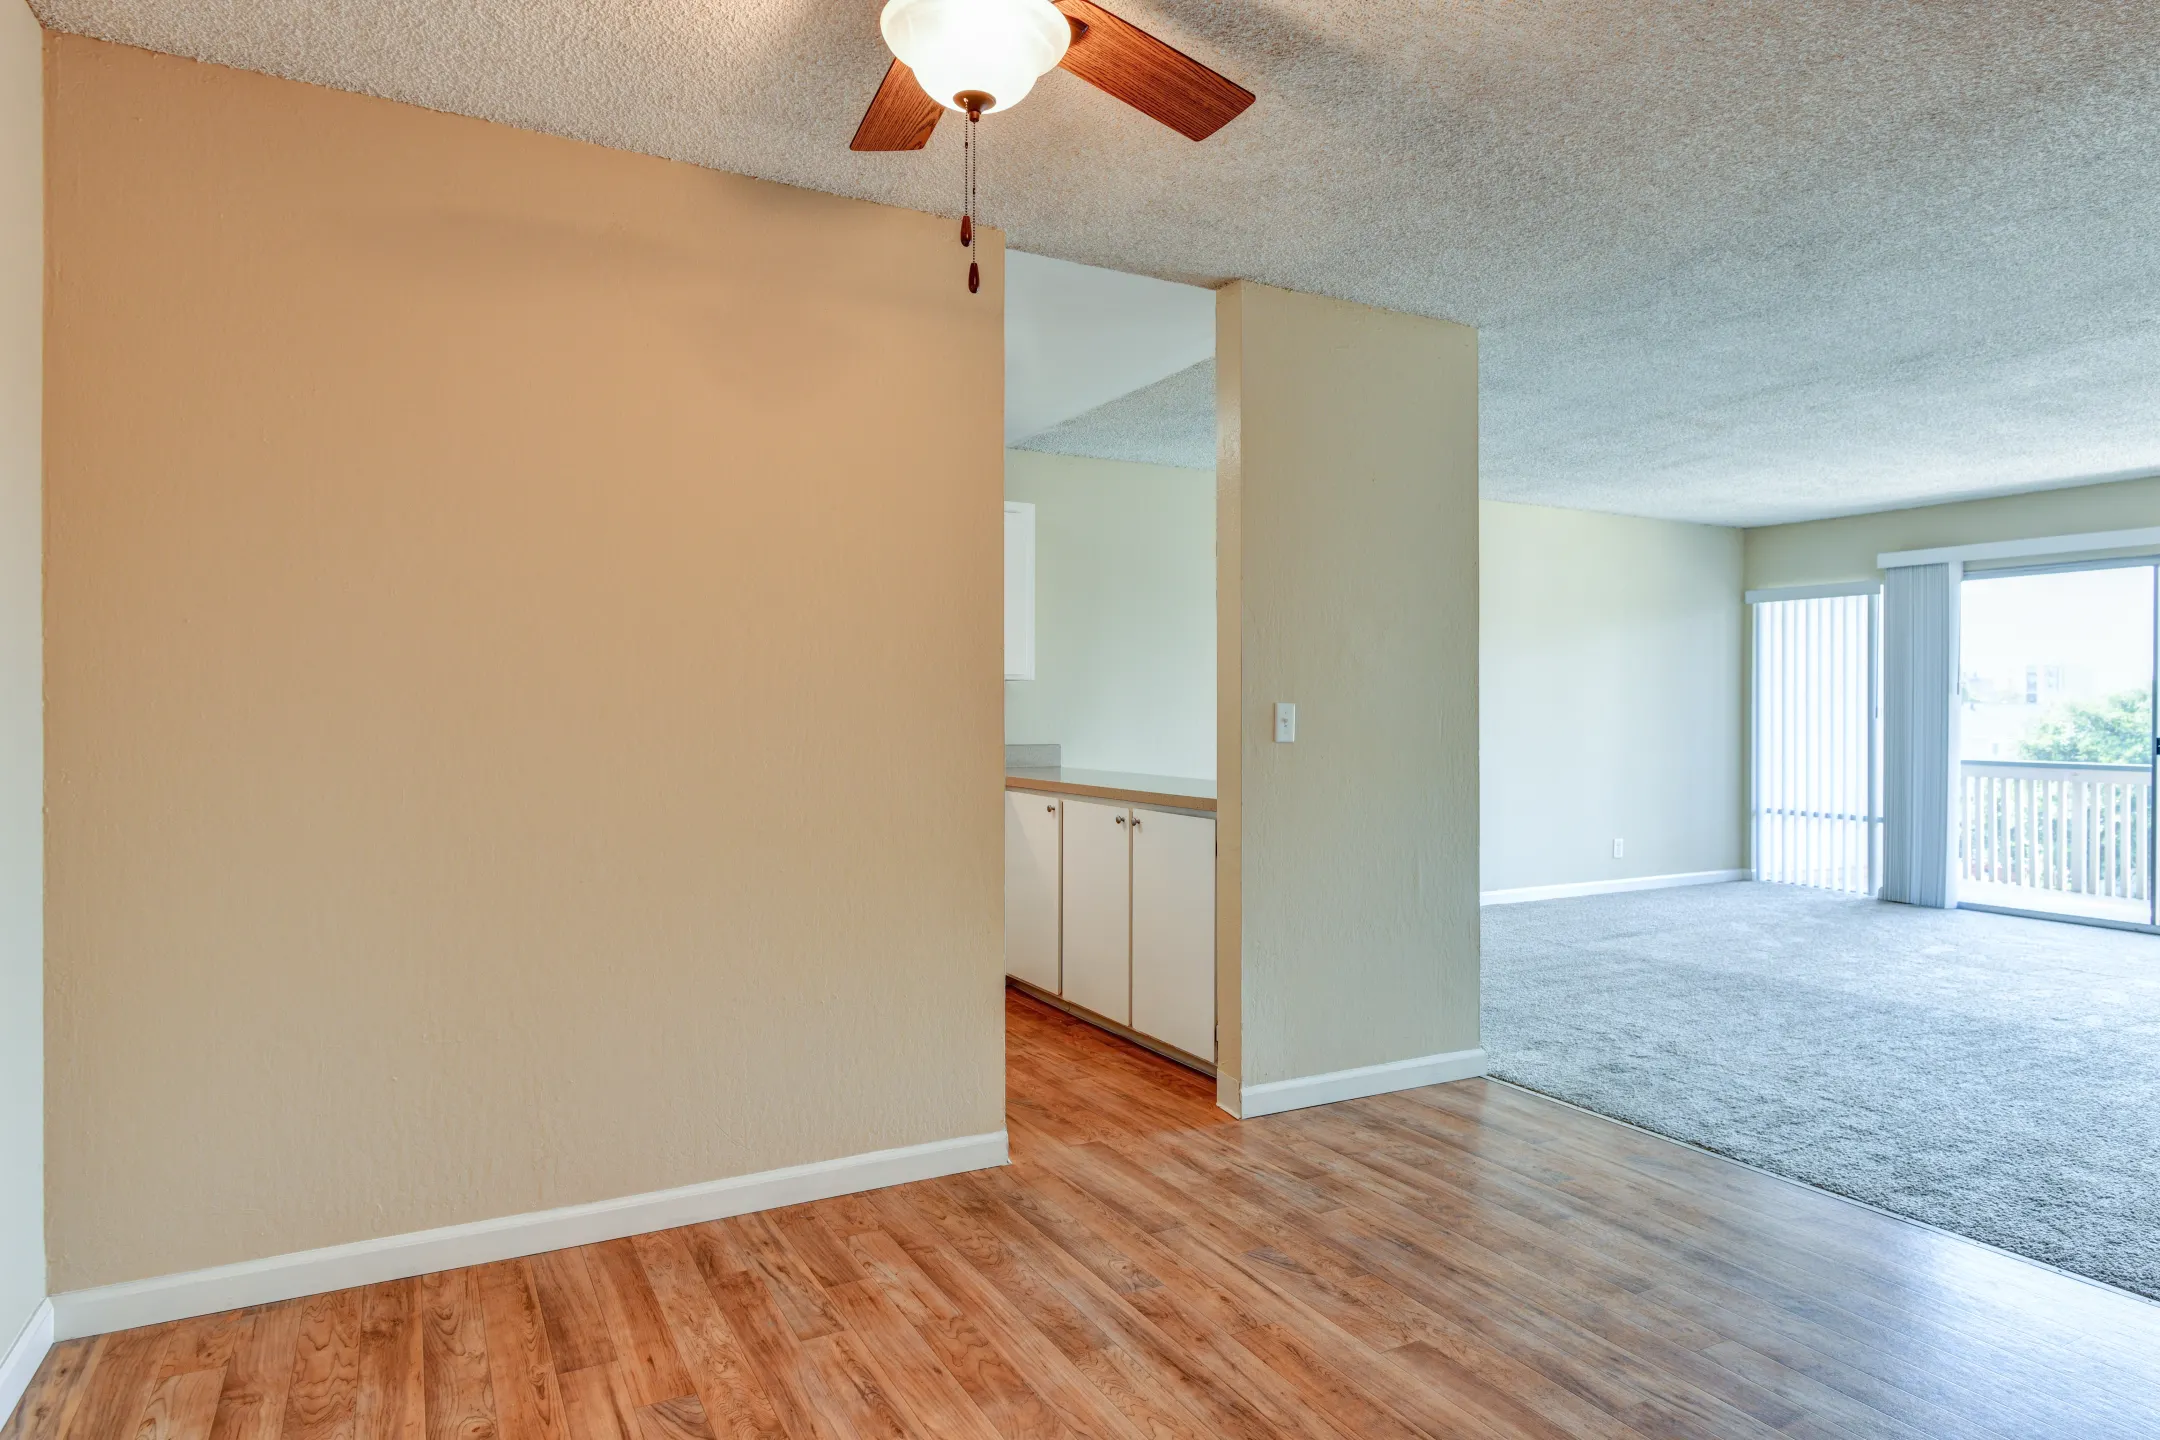 Dining Room - Tradewinds Apartments - Foster City, CA